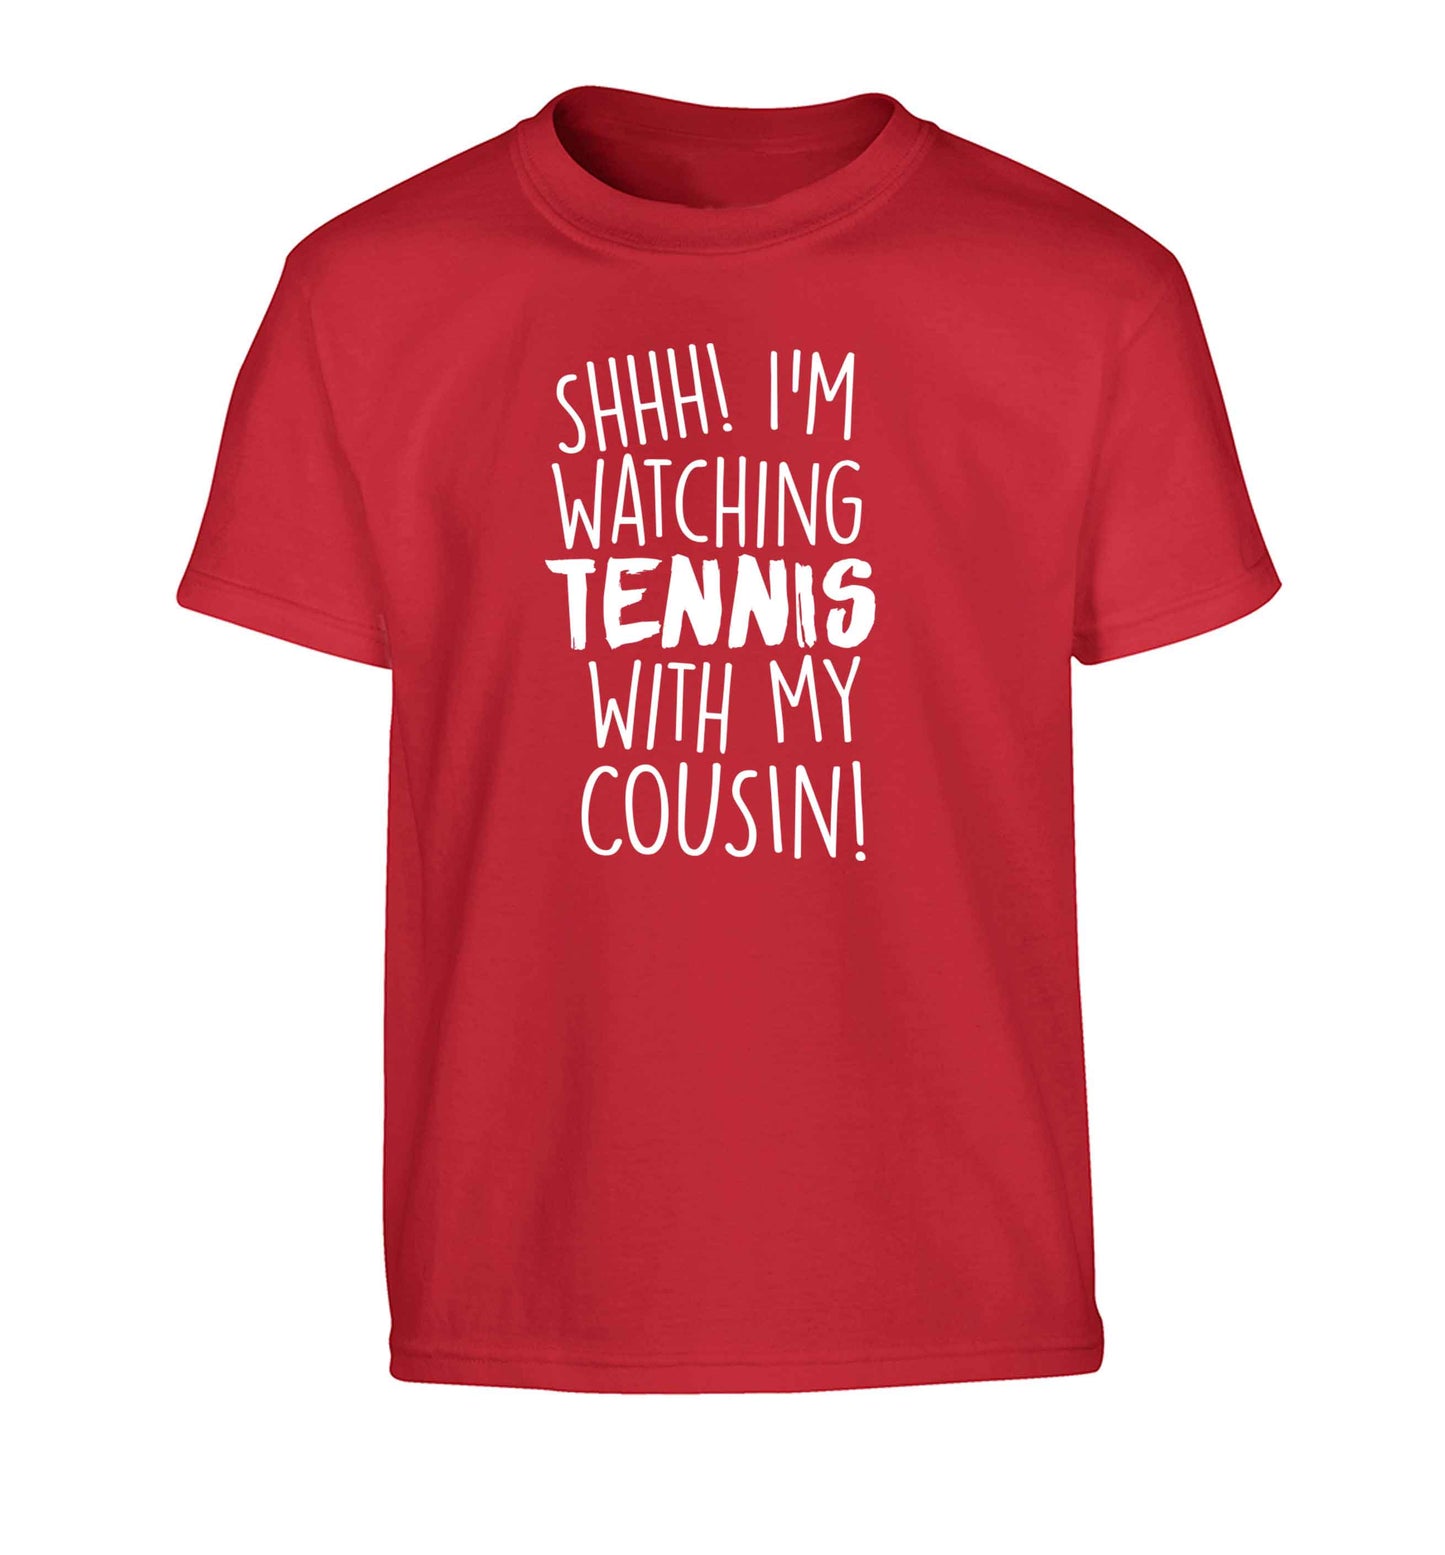 Shh! I'm watching tennis with my cousin! Children's red Tshirt 12-13 Years